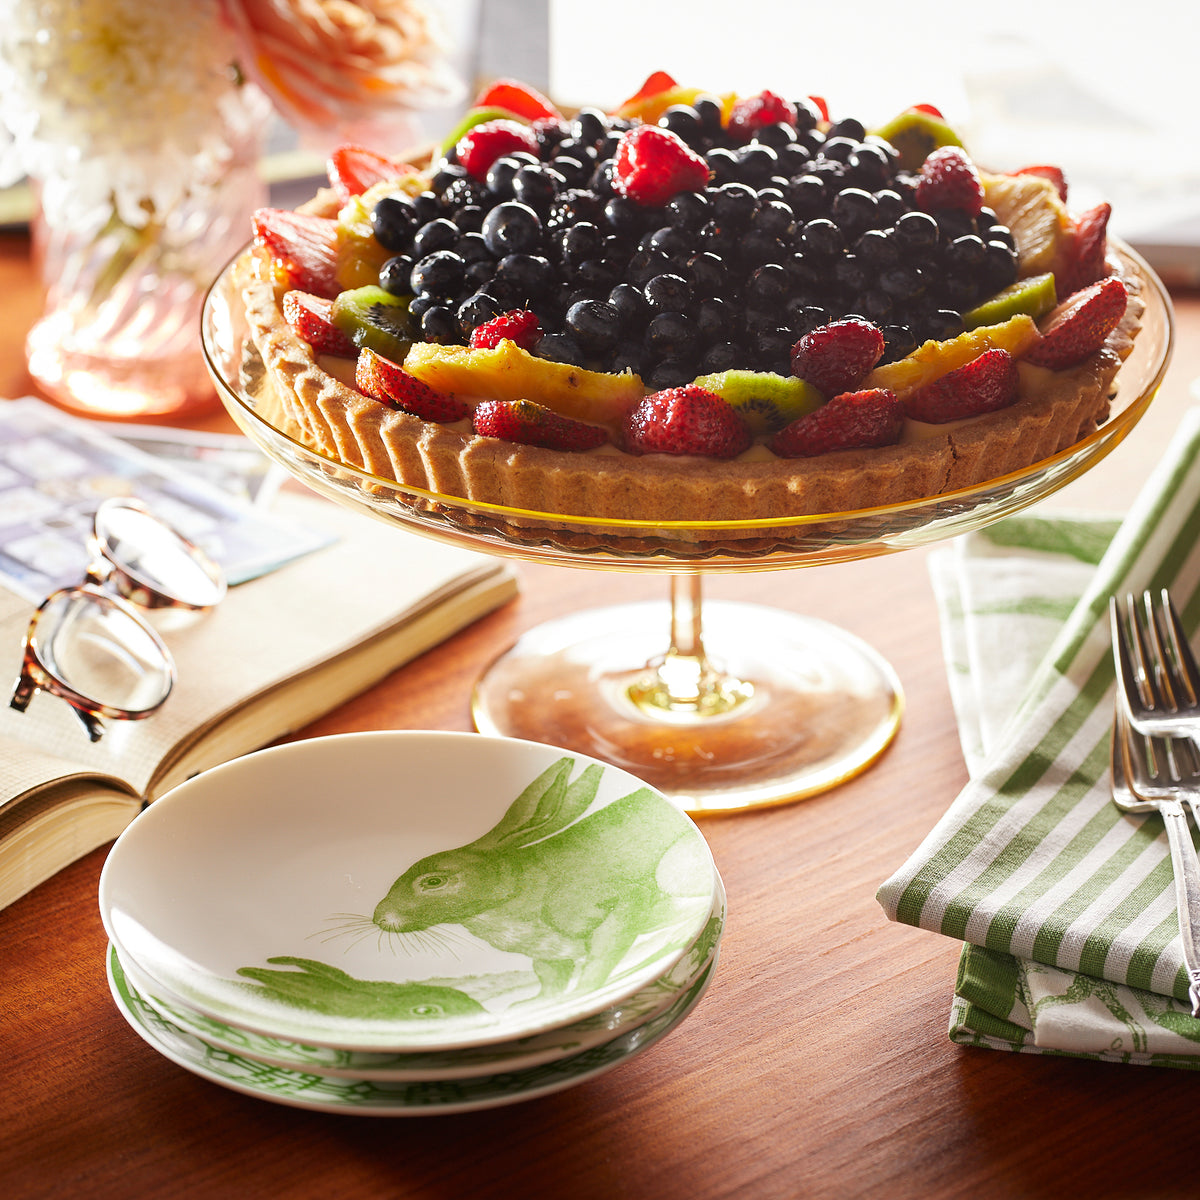 A fruit tart on a glass cake stand, surrounded by a stack of Caskata Bunnies Verde Small Plates, a folded green-striped napkin, and a pair of eyeglasses on an open book.